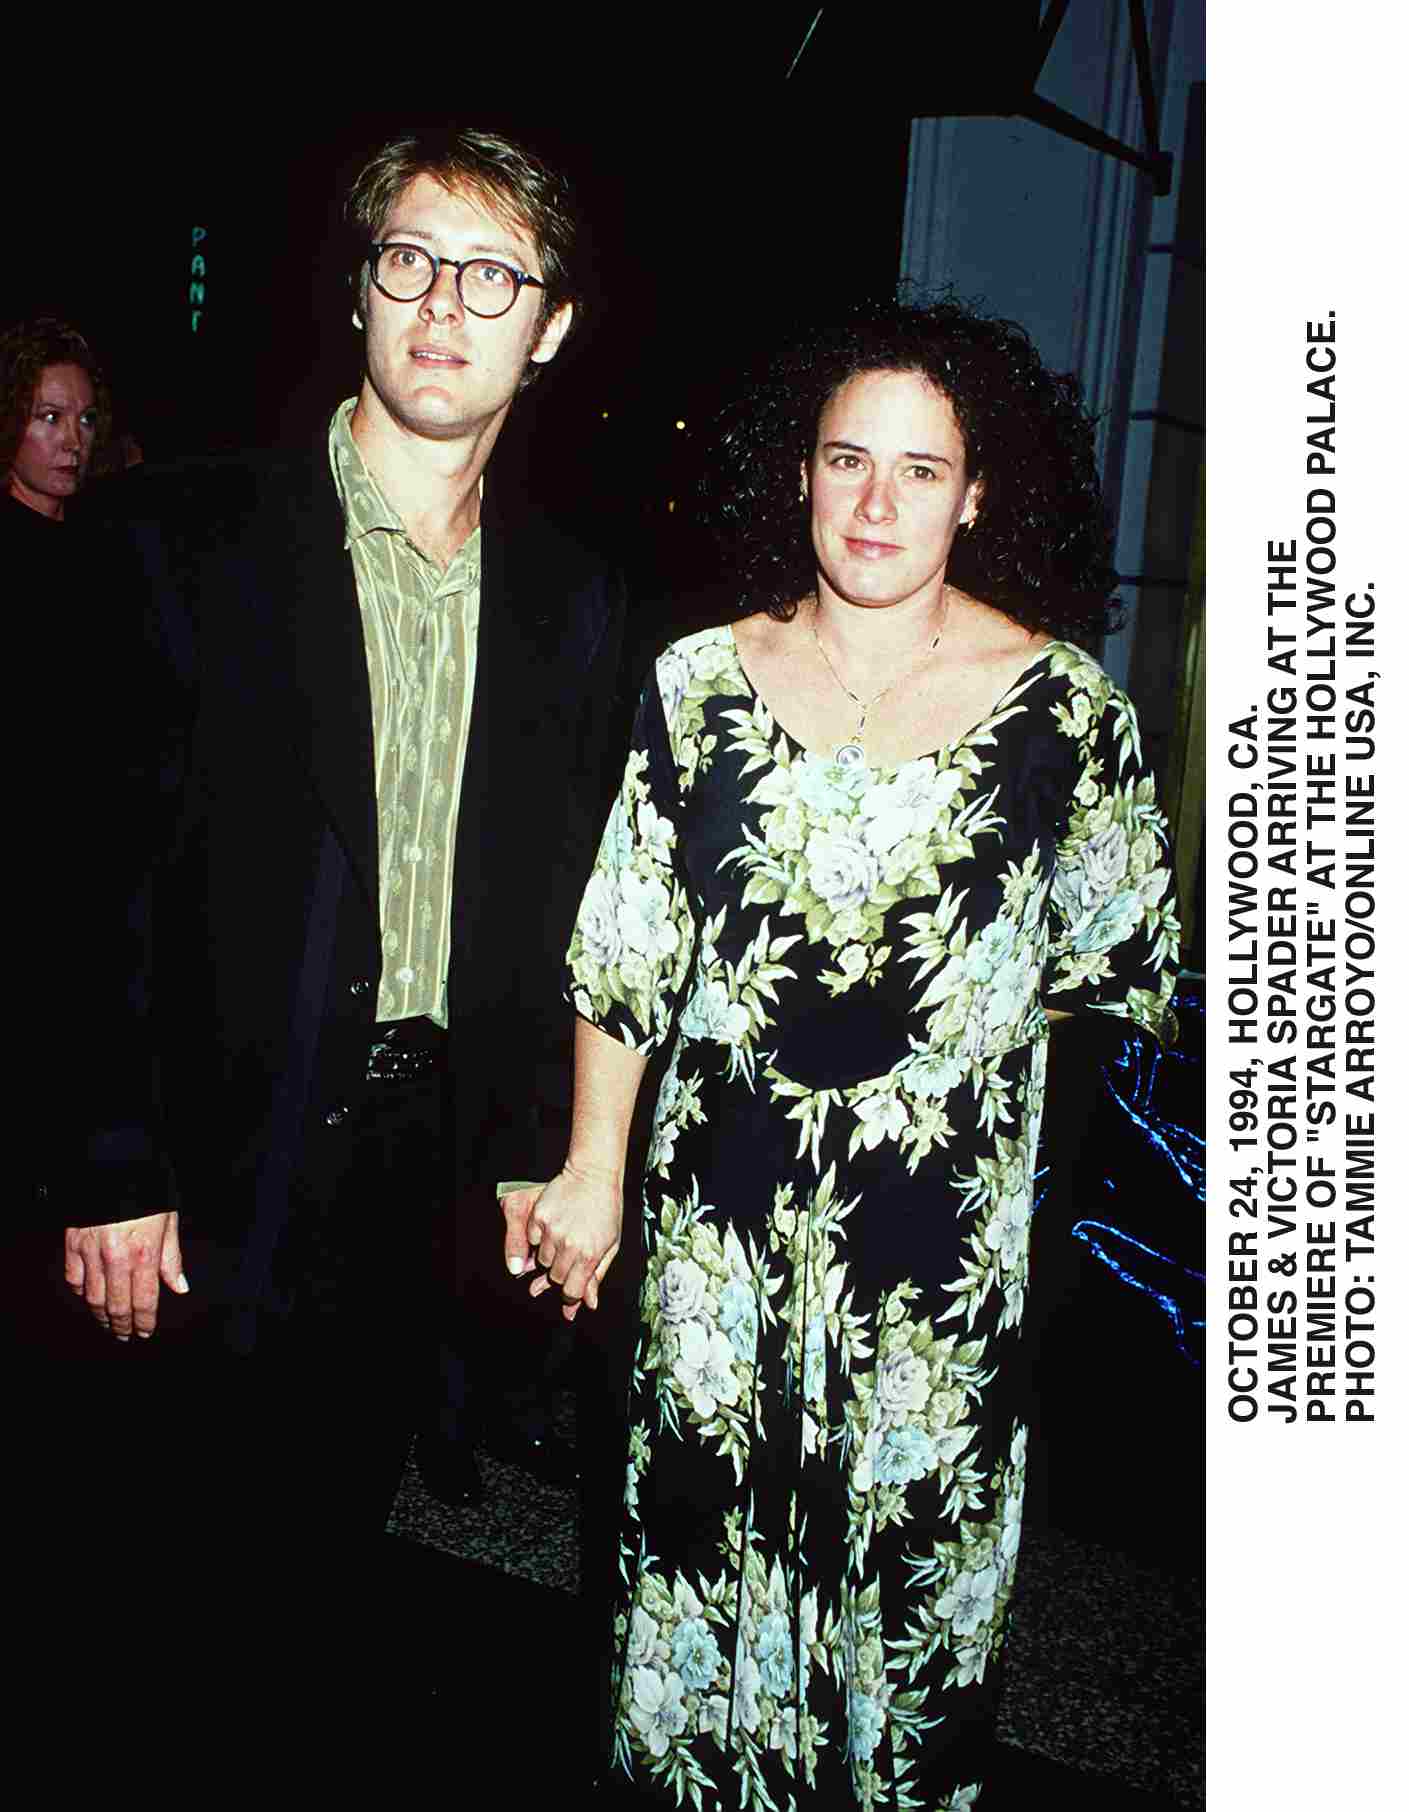 James Spader and Victoria Kheel Arriving The The Premiere Of "Stargate" At Mann's Chinese Theatre On October 24, 1994, Hollywood, Ca.  | Source: Getty Images